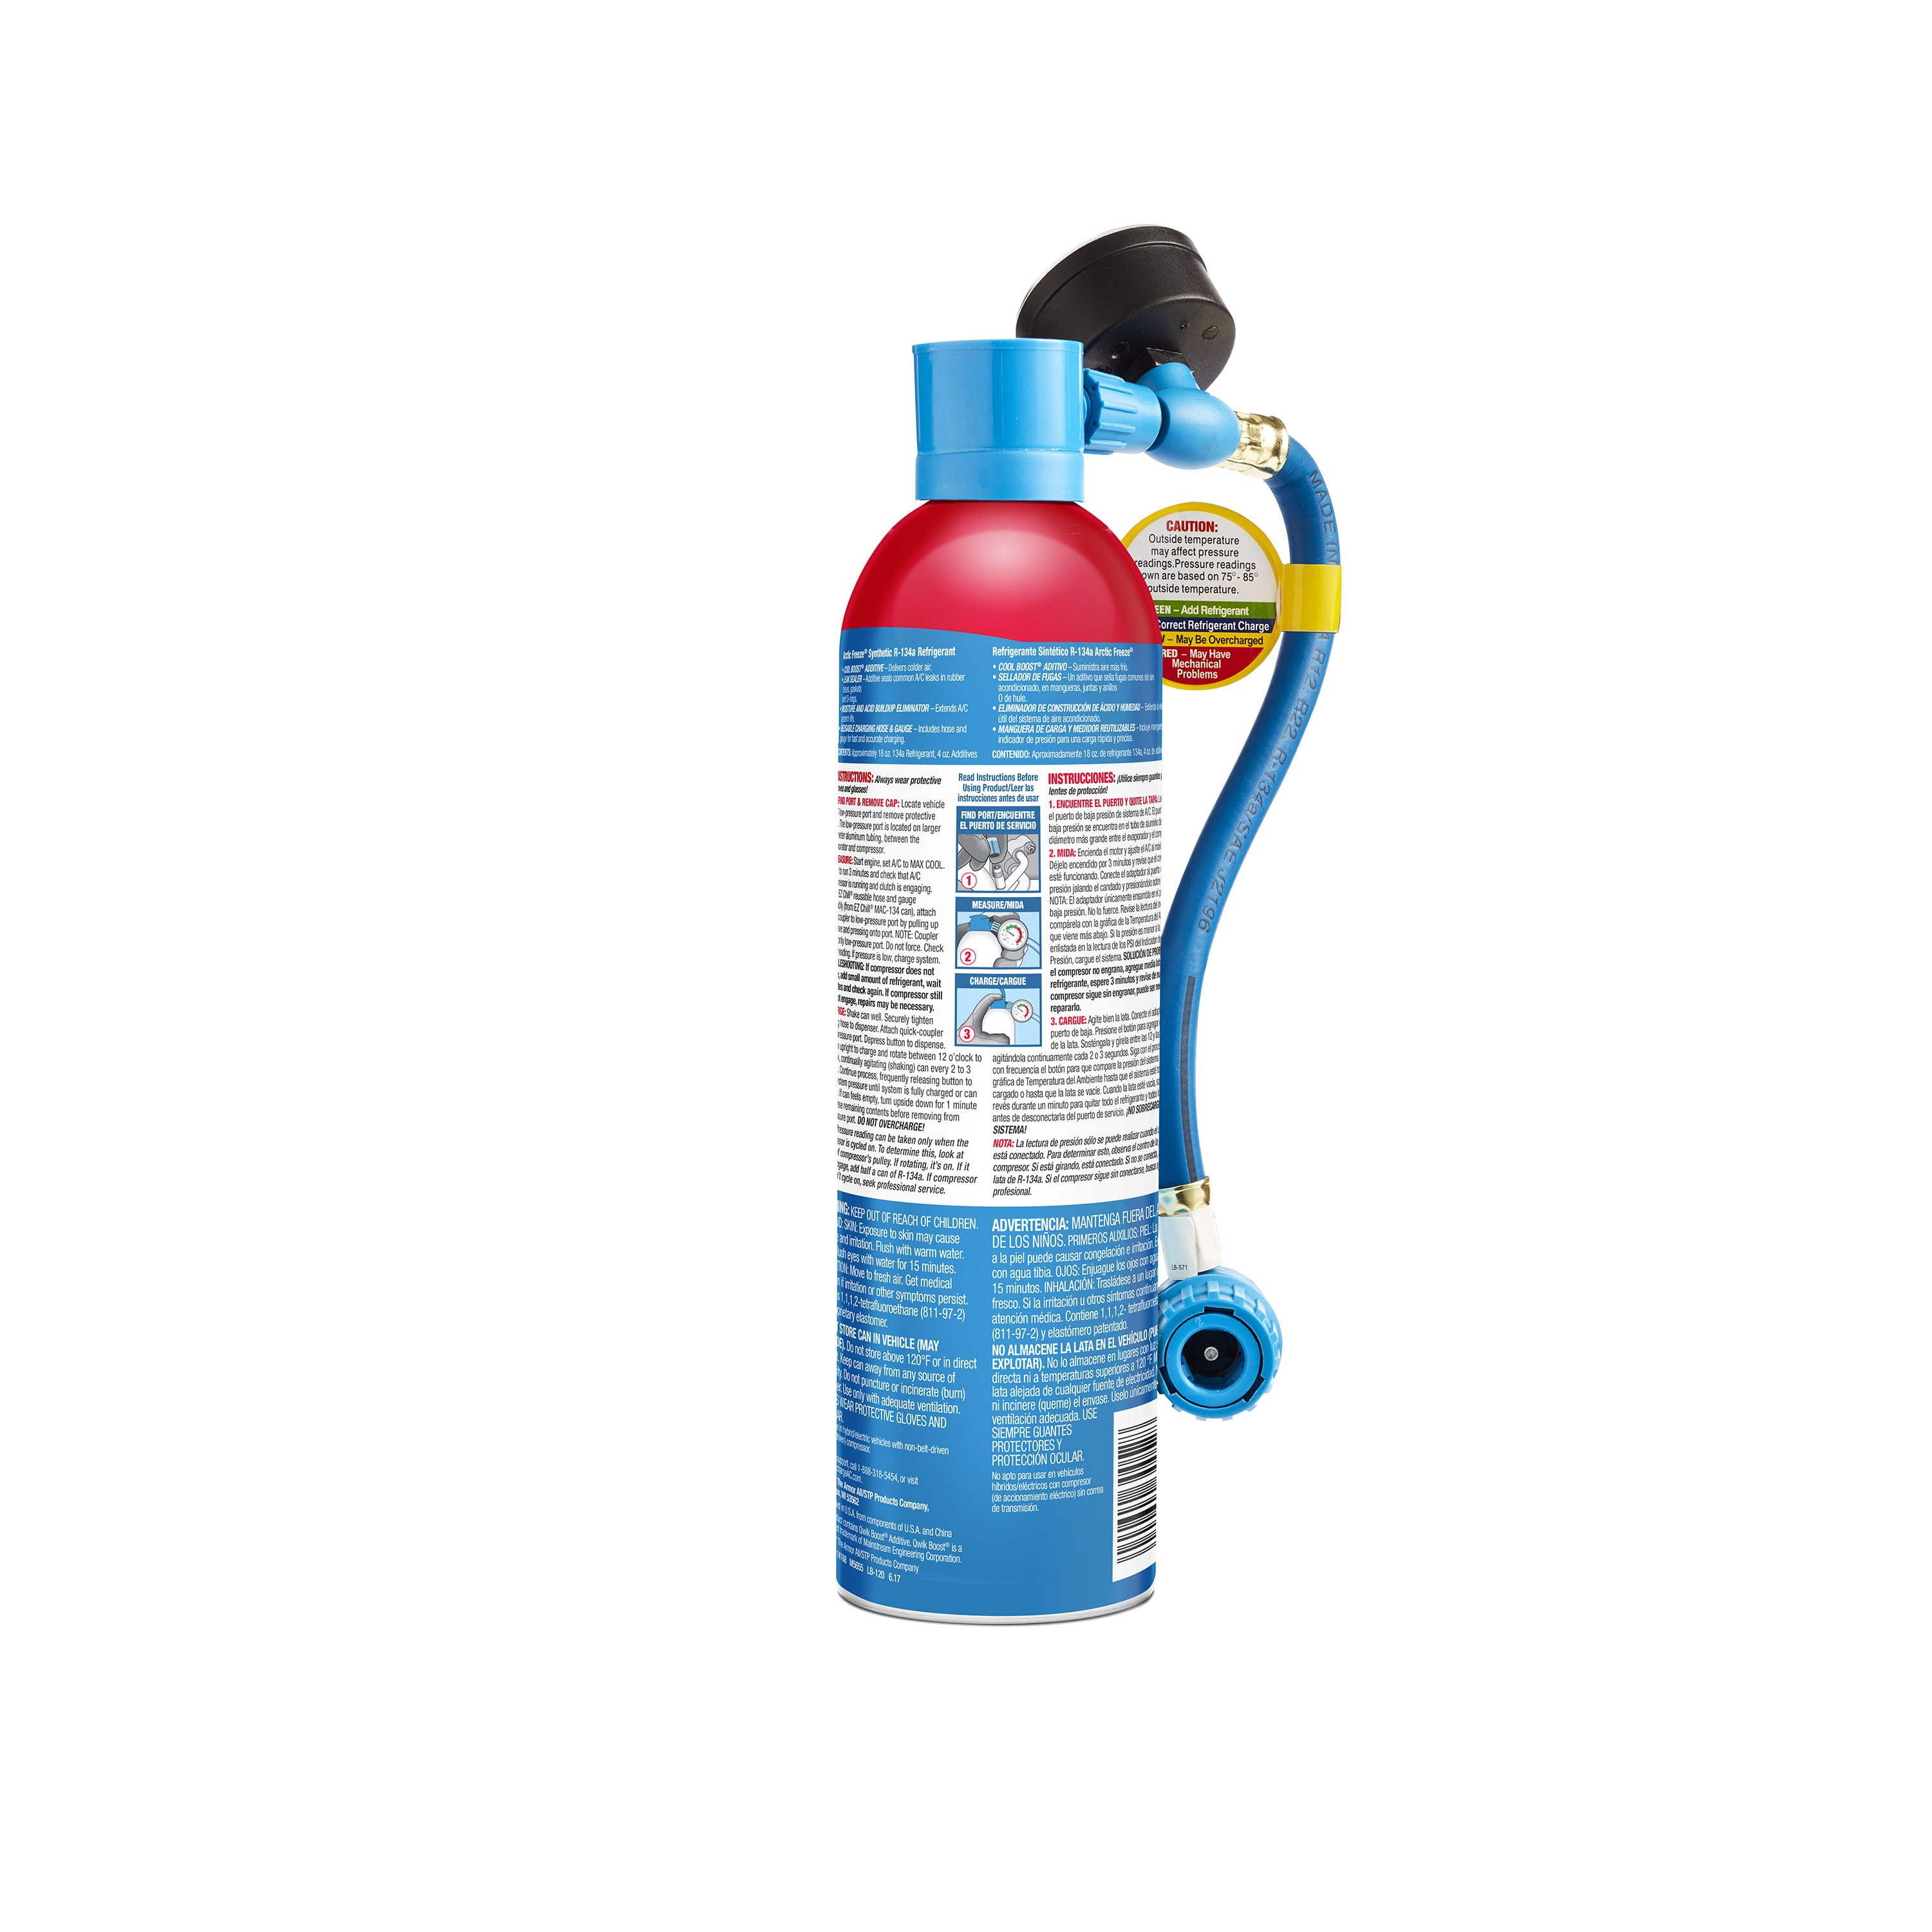 refrigerant support cans and hose R-12 Artic air, 12 cold air booster R12